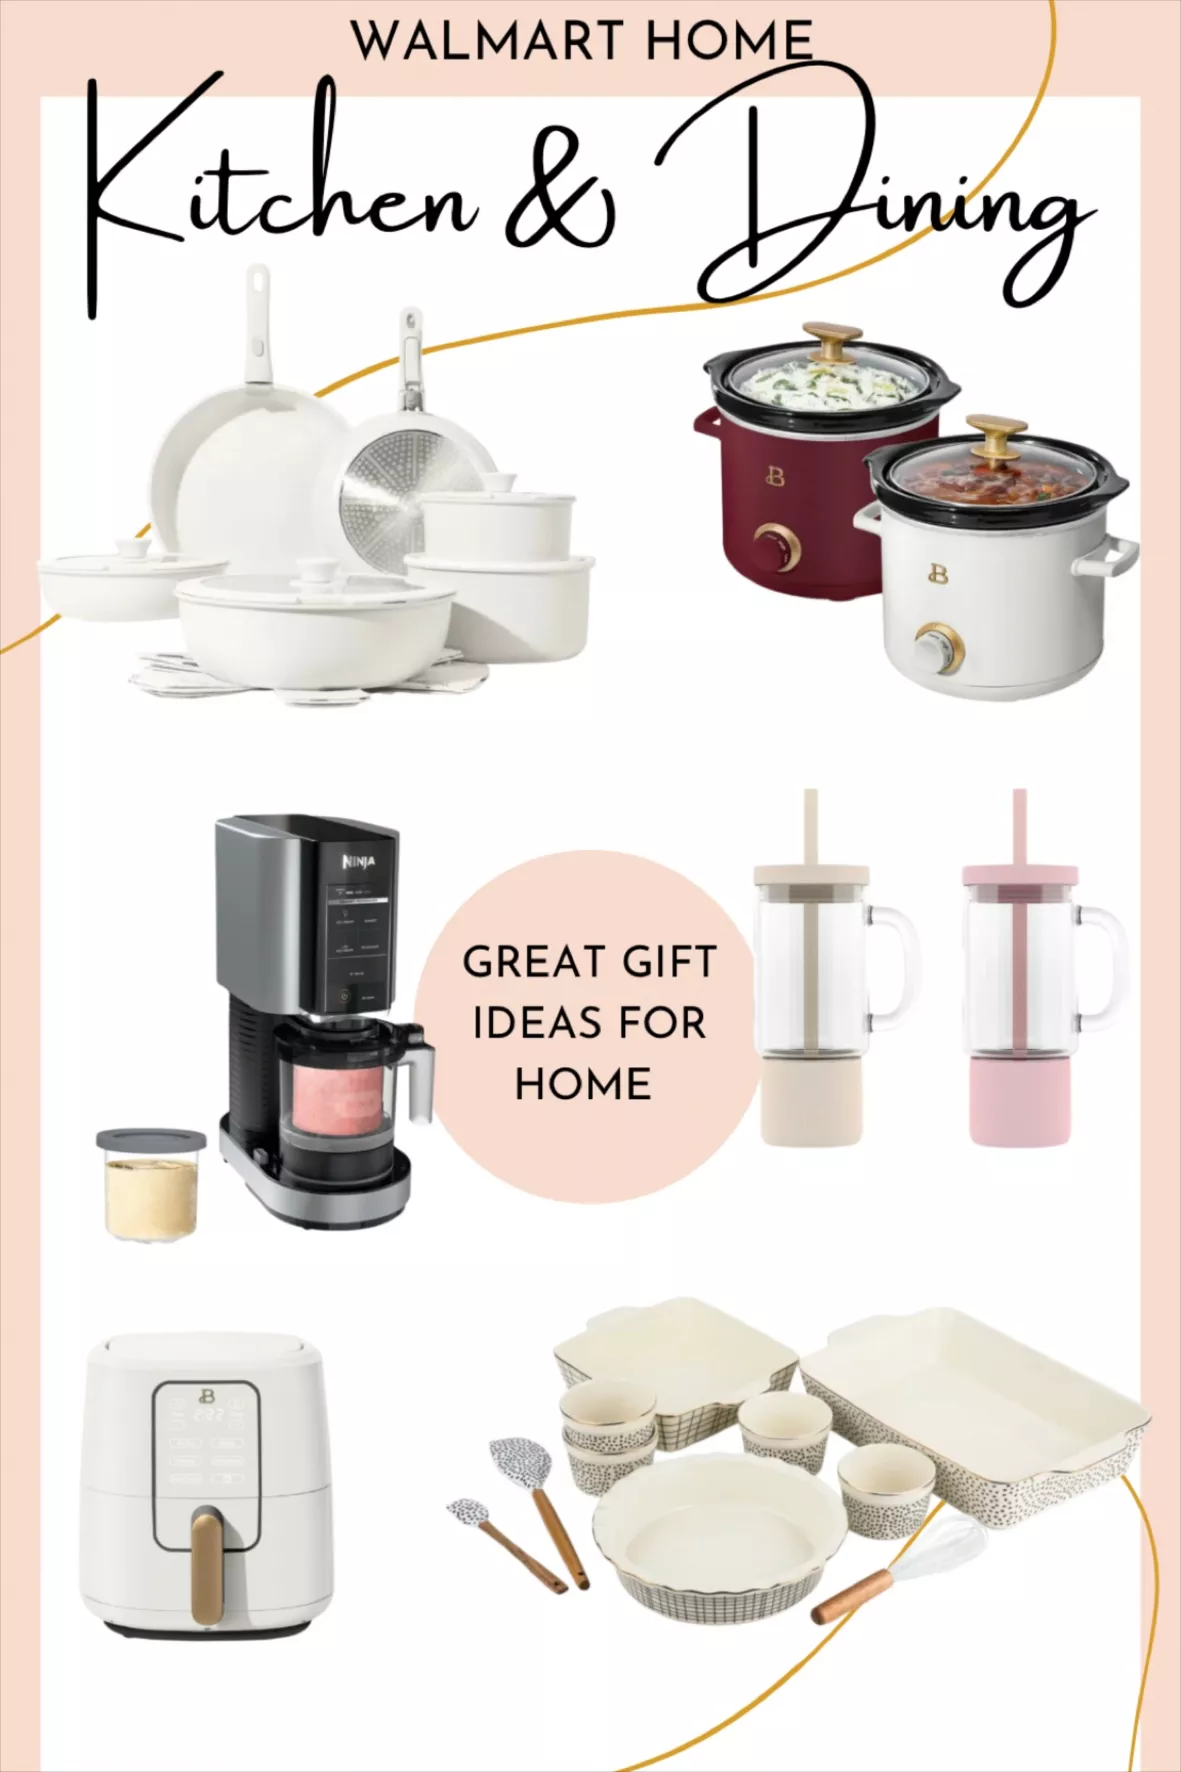 Gifts for the Foodie, Home Cook & Entertainer